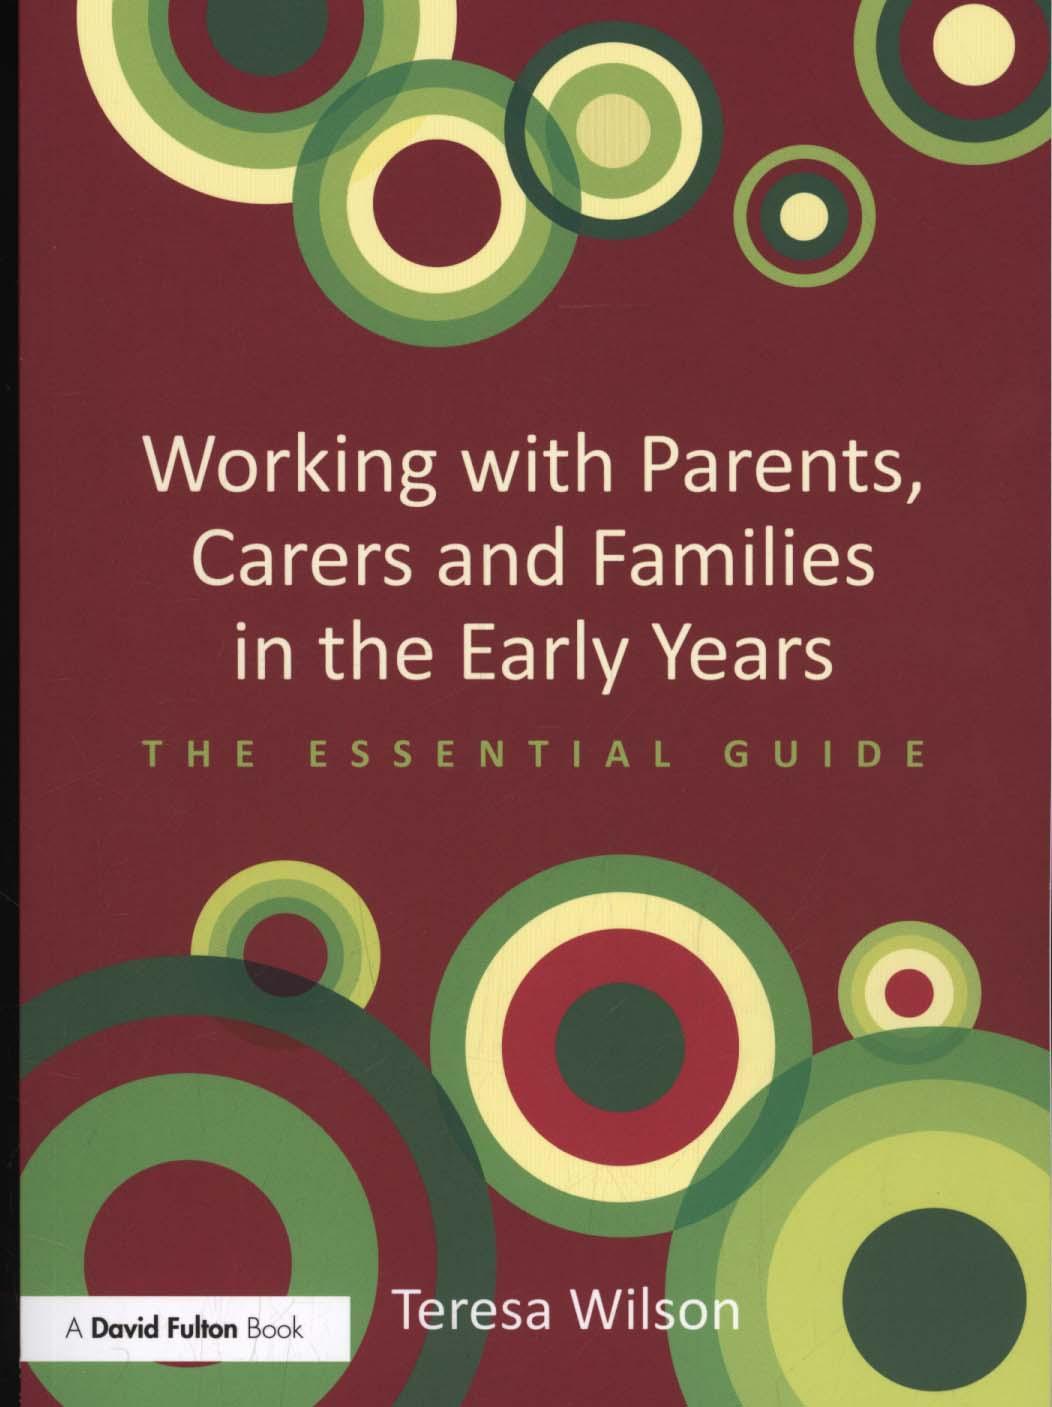 Working with Parents, Carers and Families in the Early Years